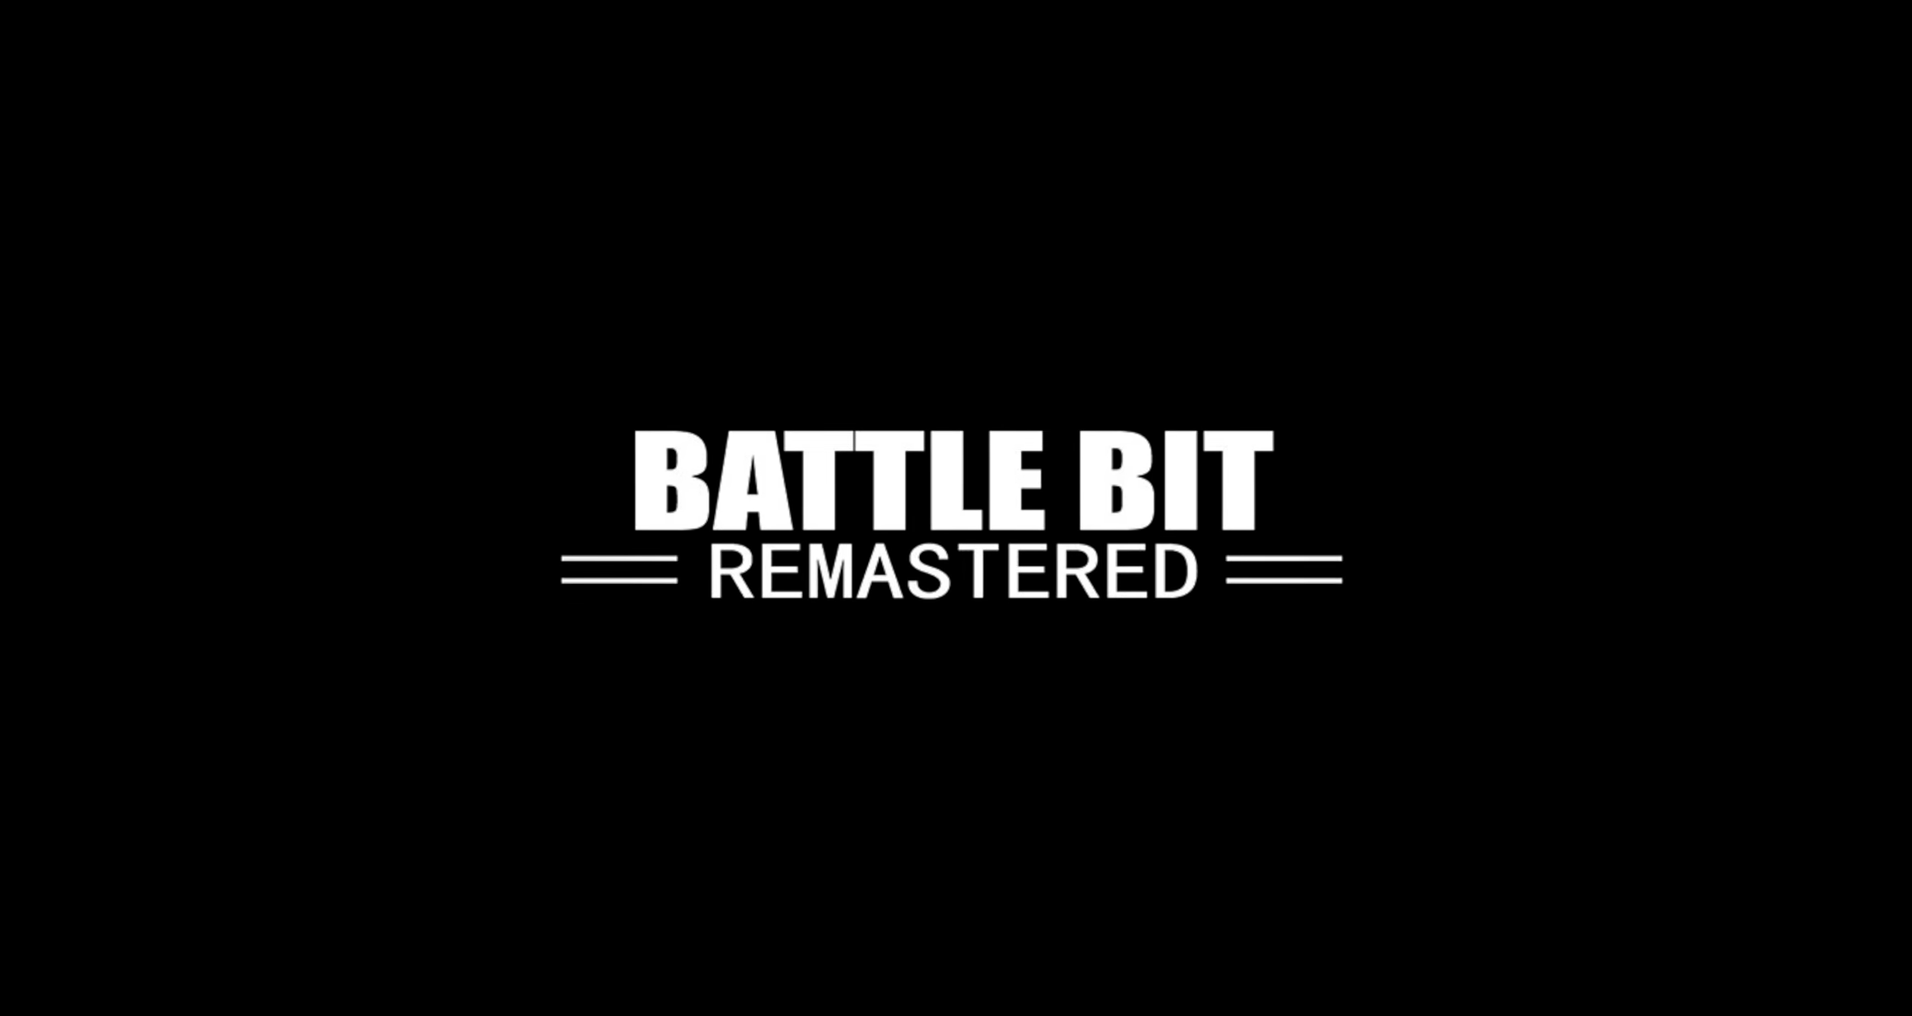 BattleBit Remastered becomes best-selling premium game on Steam